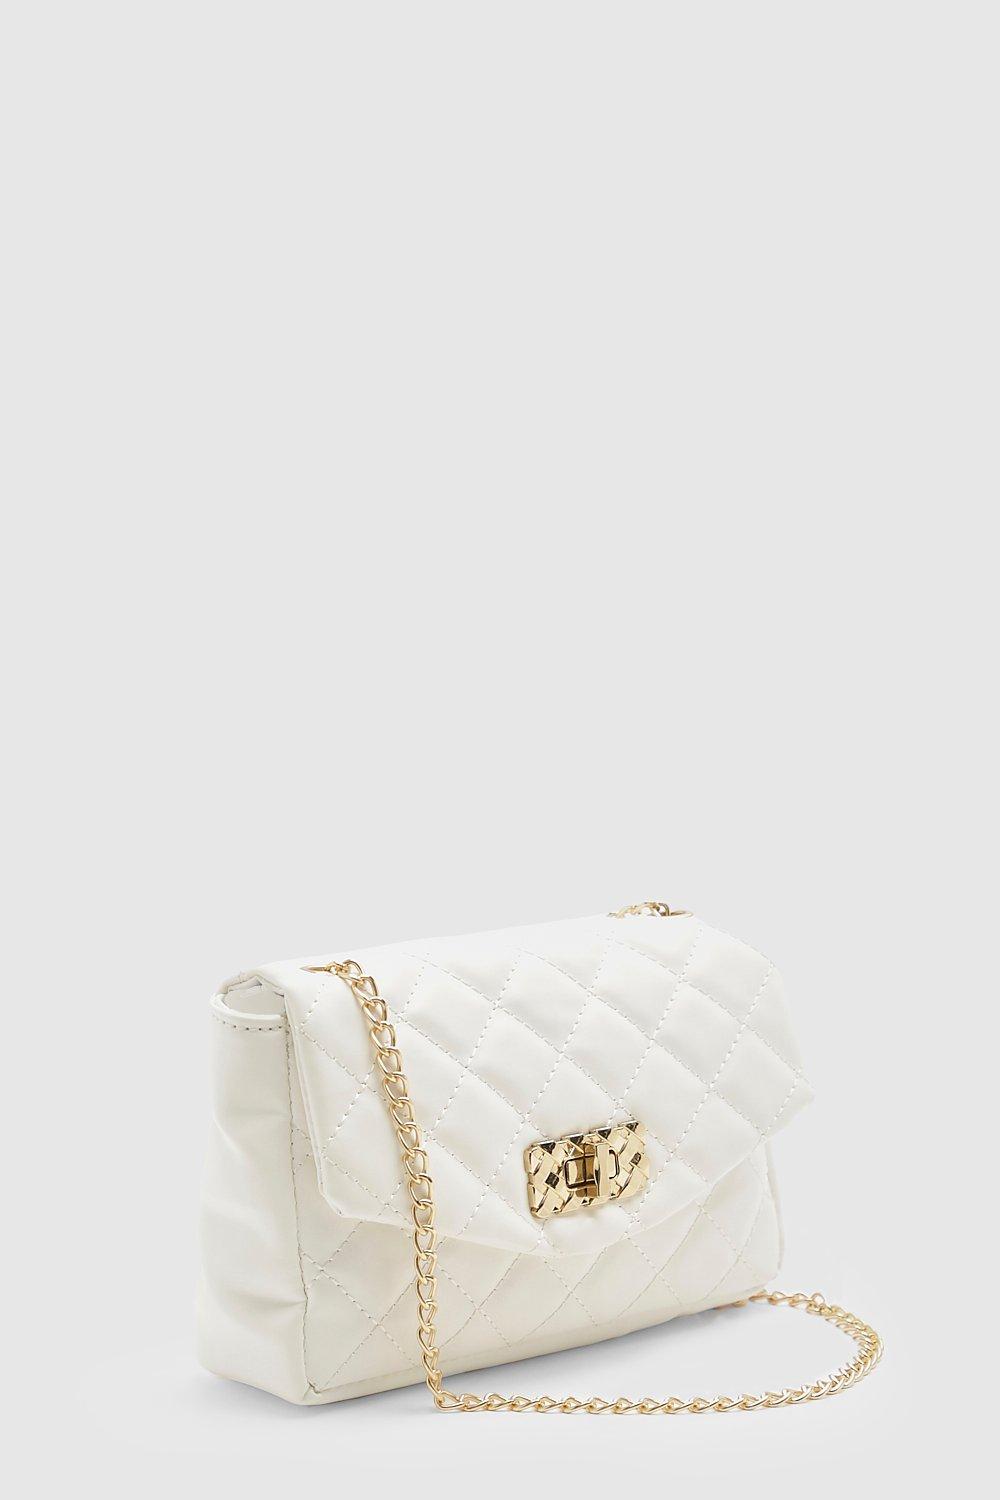 boohoo Gold Buckle Detail Cross Body Bag - White - One Size